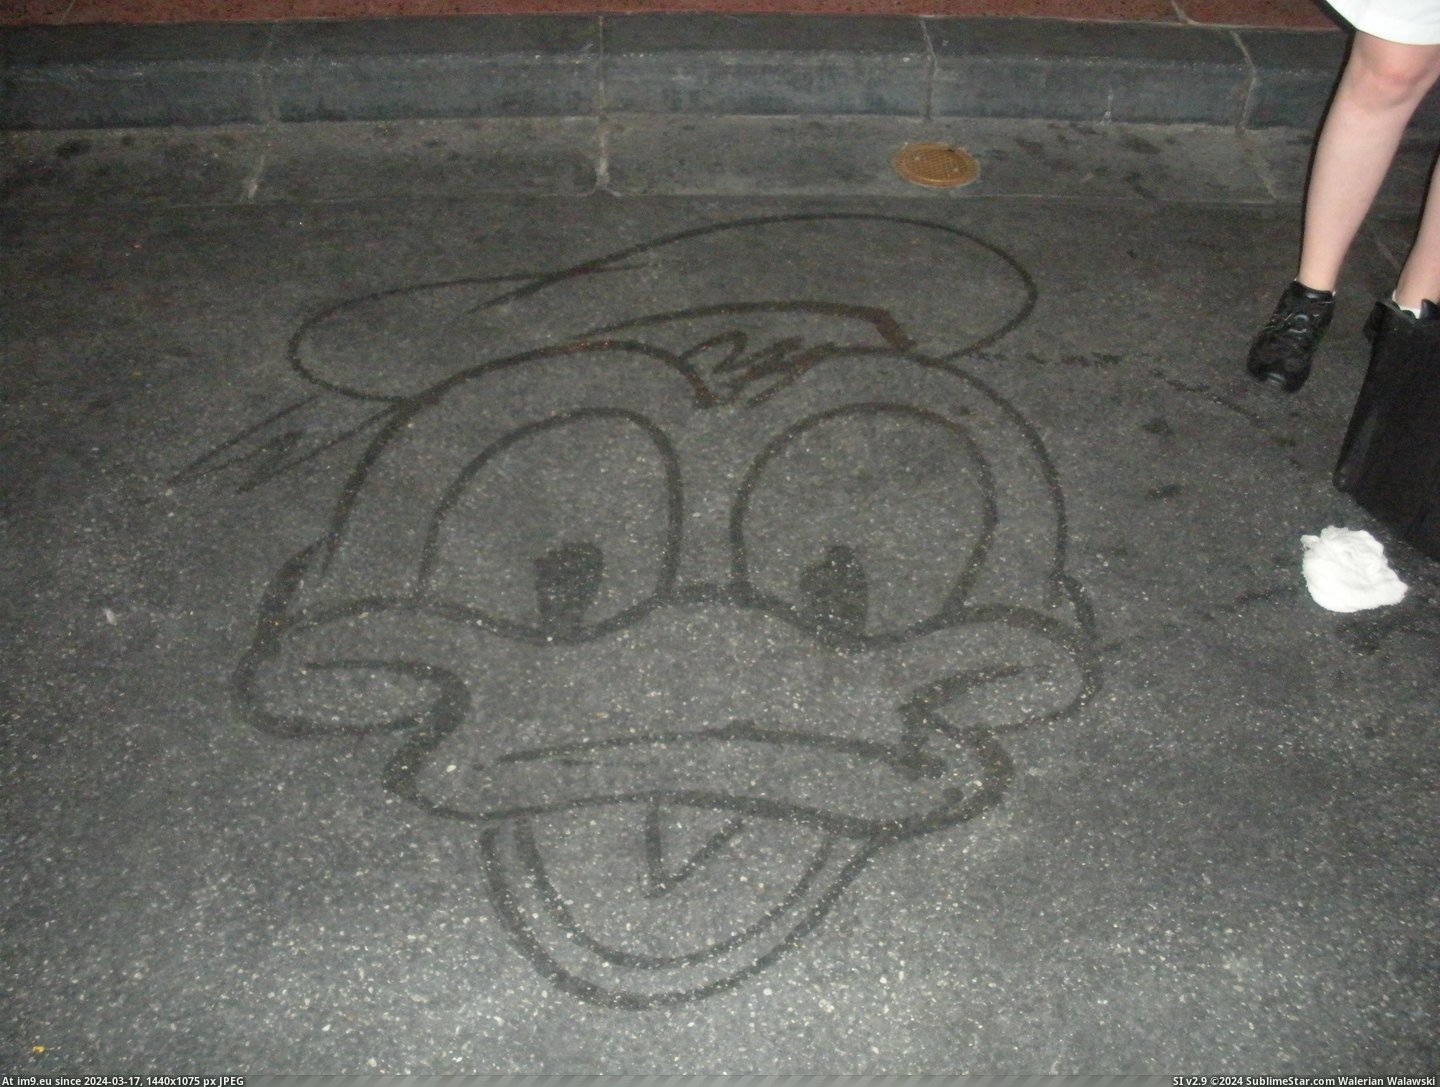 #World #Water #Disney #Guests #Janitor #Broom #Entertain #Characters #Drew #Sidewalk [Pics] As a janitor at Disney World, I drew characters with water and a broom on the sidewalk to entertain guests. 4 Pic. (Image of album My r/PICS favs))